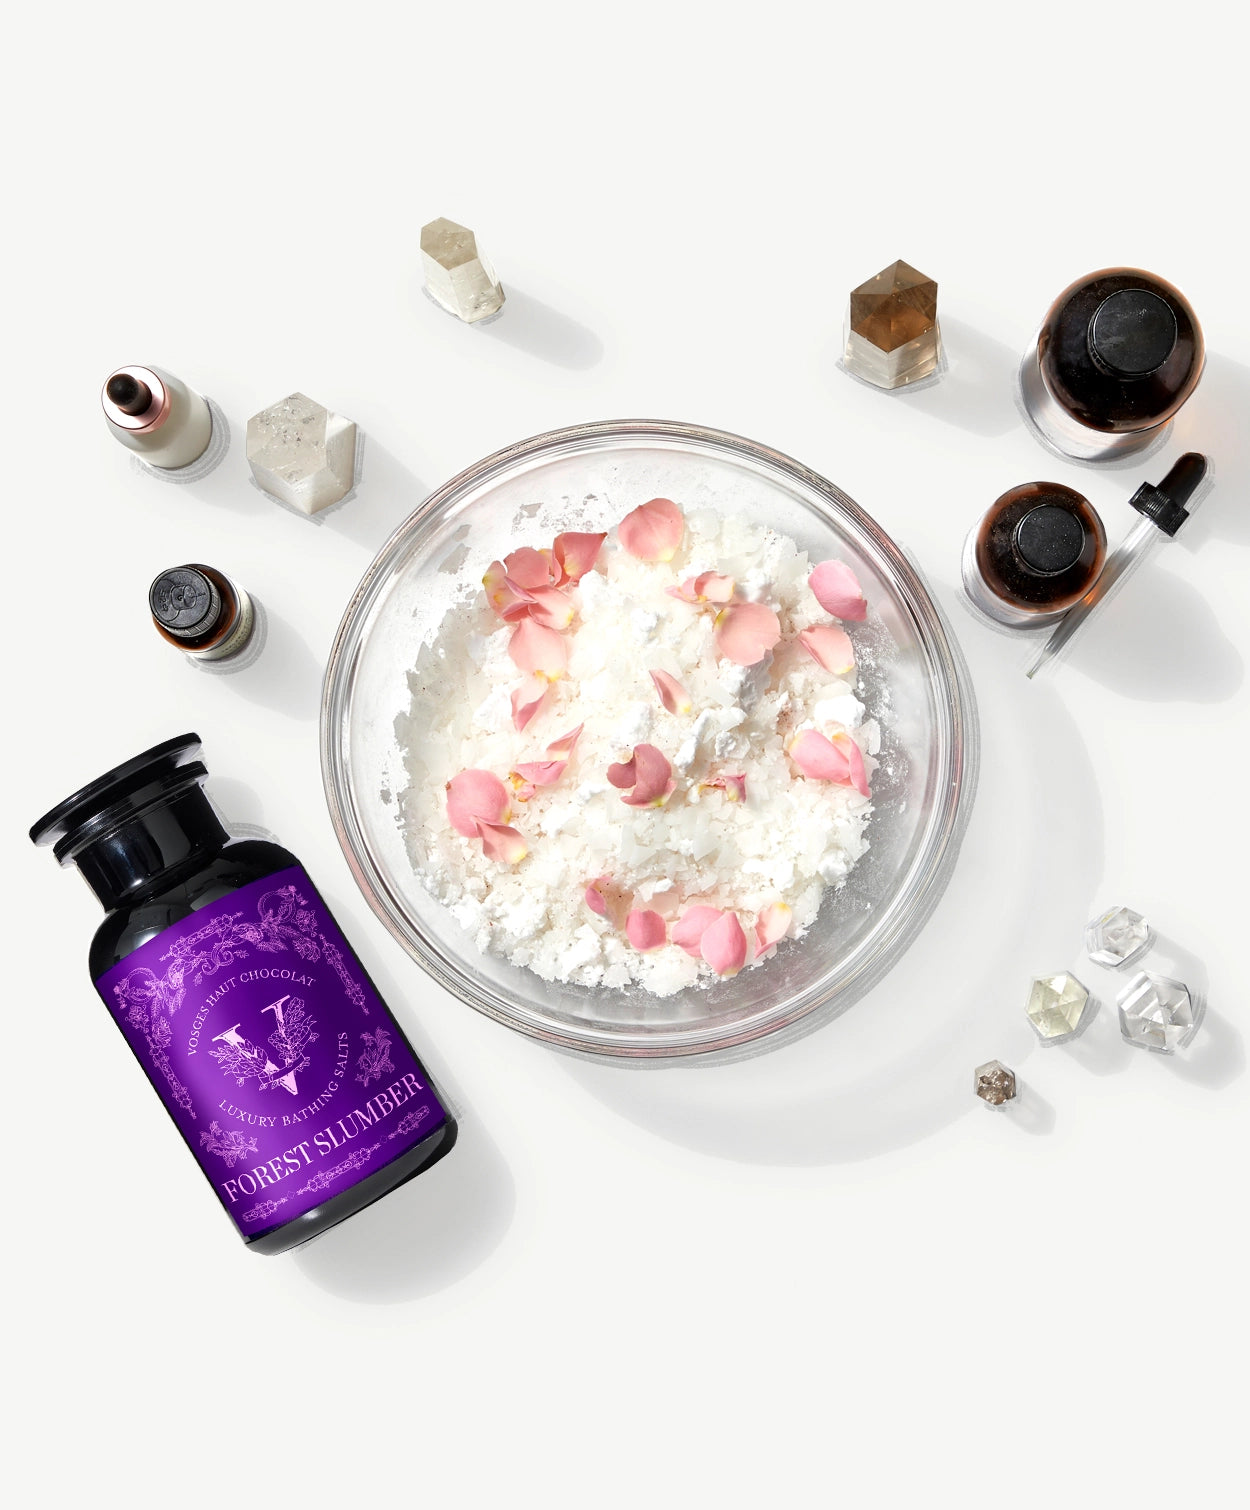 Vosges Haut Chocolat Forest Slumber bath salts beside several crystals and a bowl of flower petals on a light grey background.